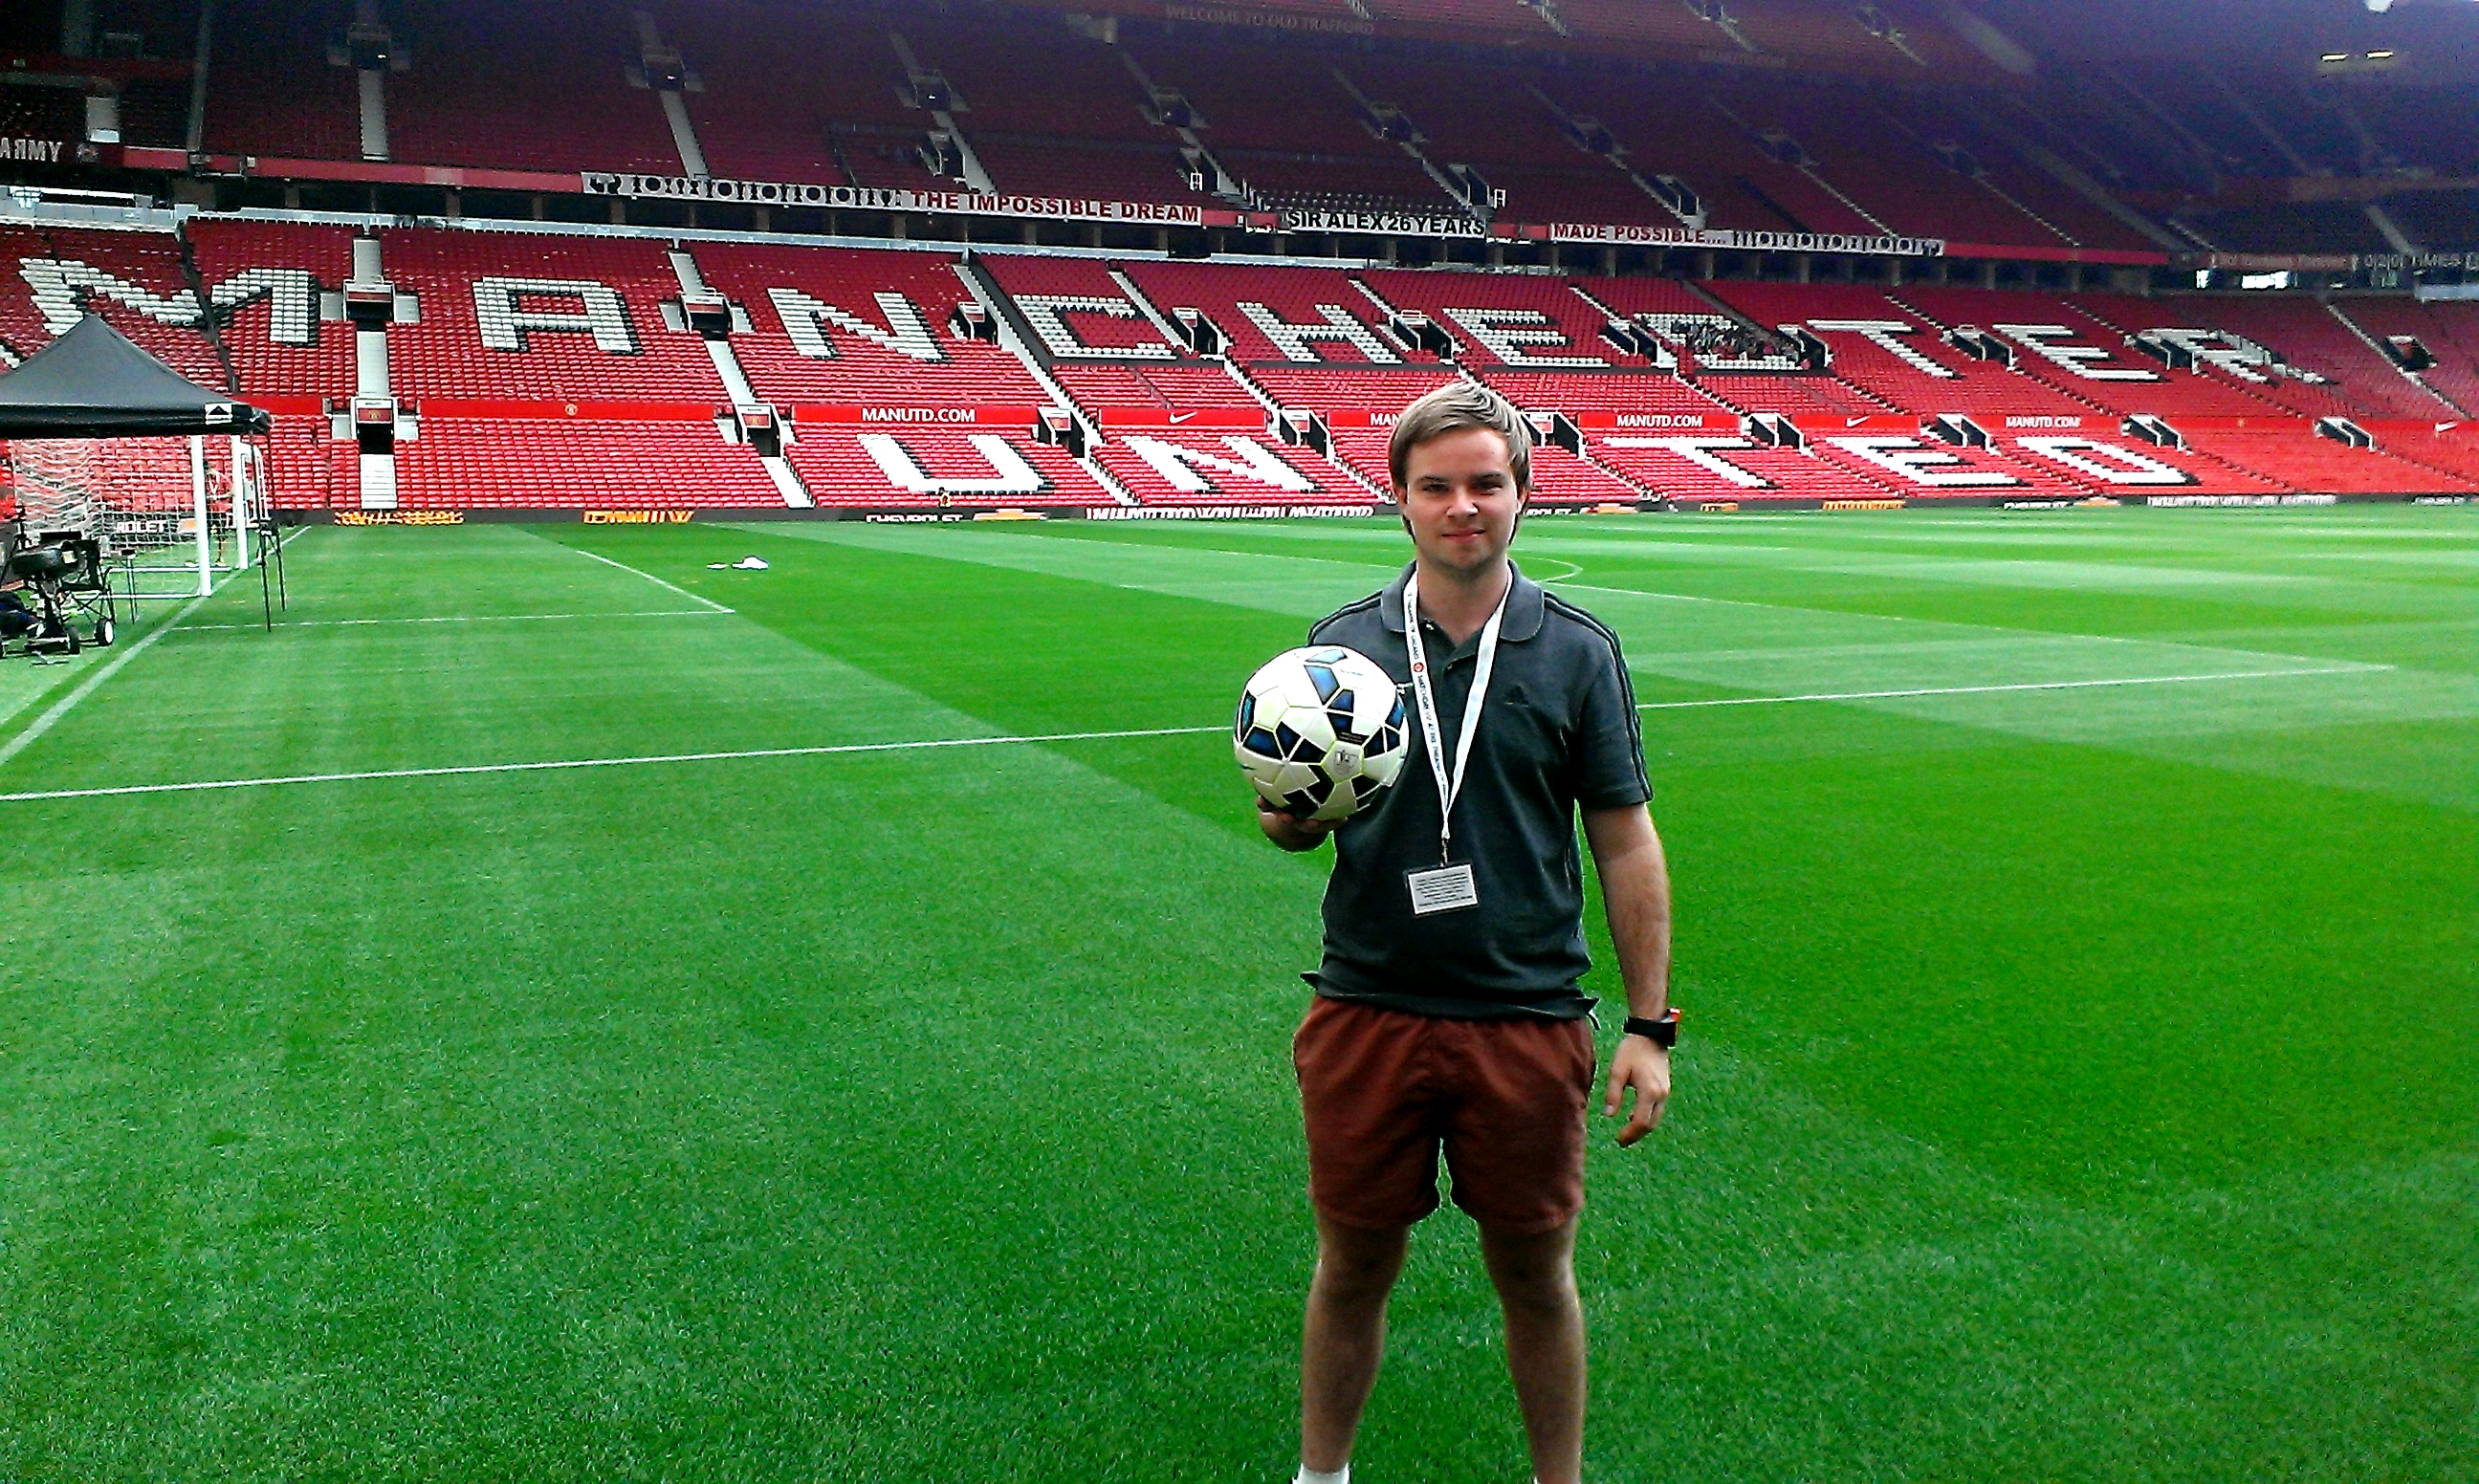 Jonathan Shepherd at Old Trafford, home ground of Manchester United